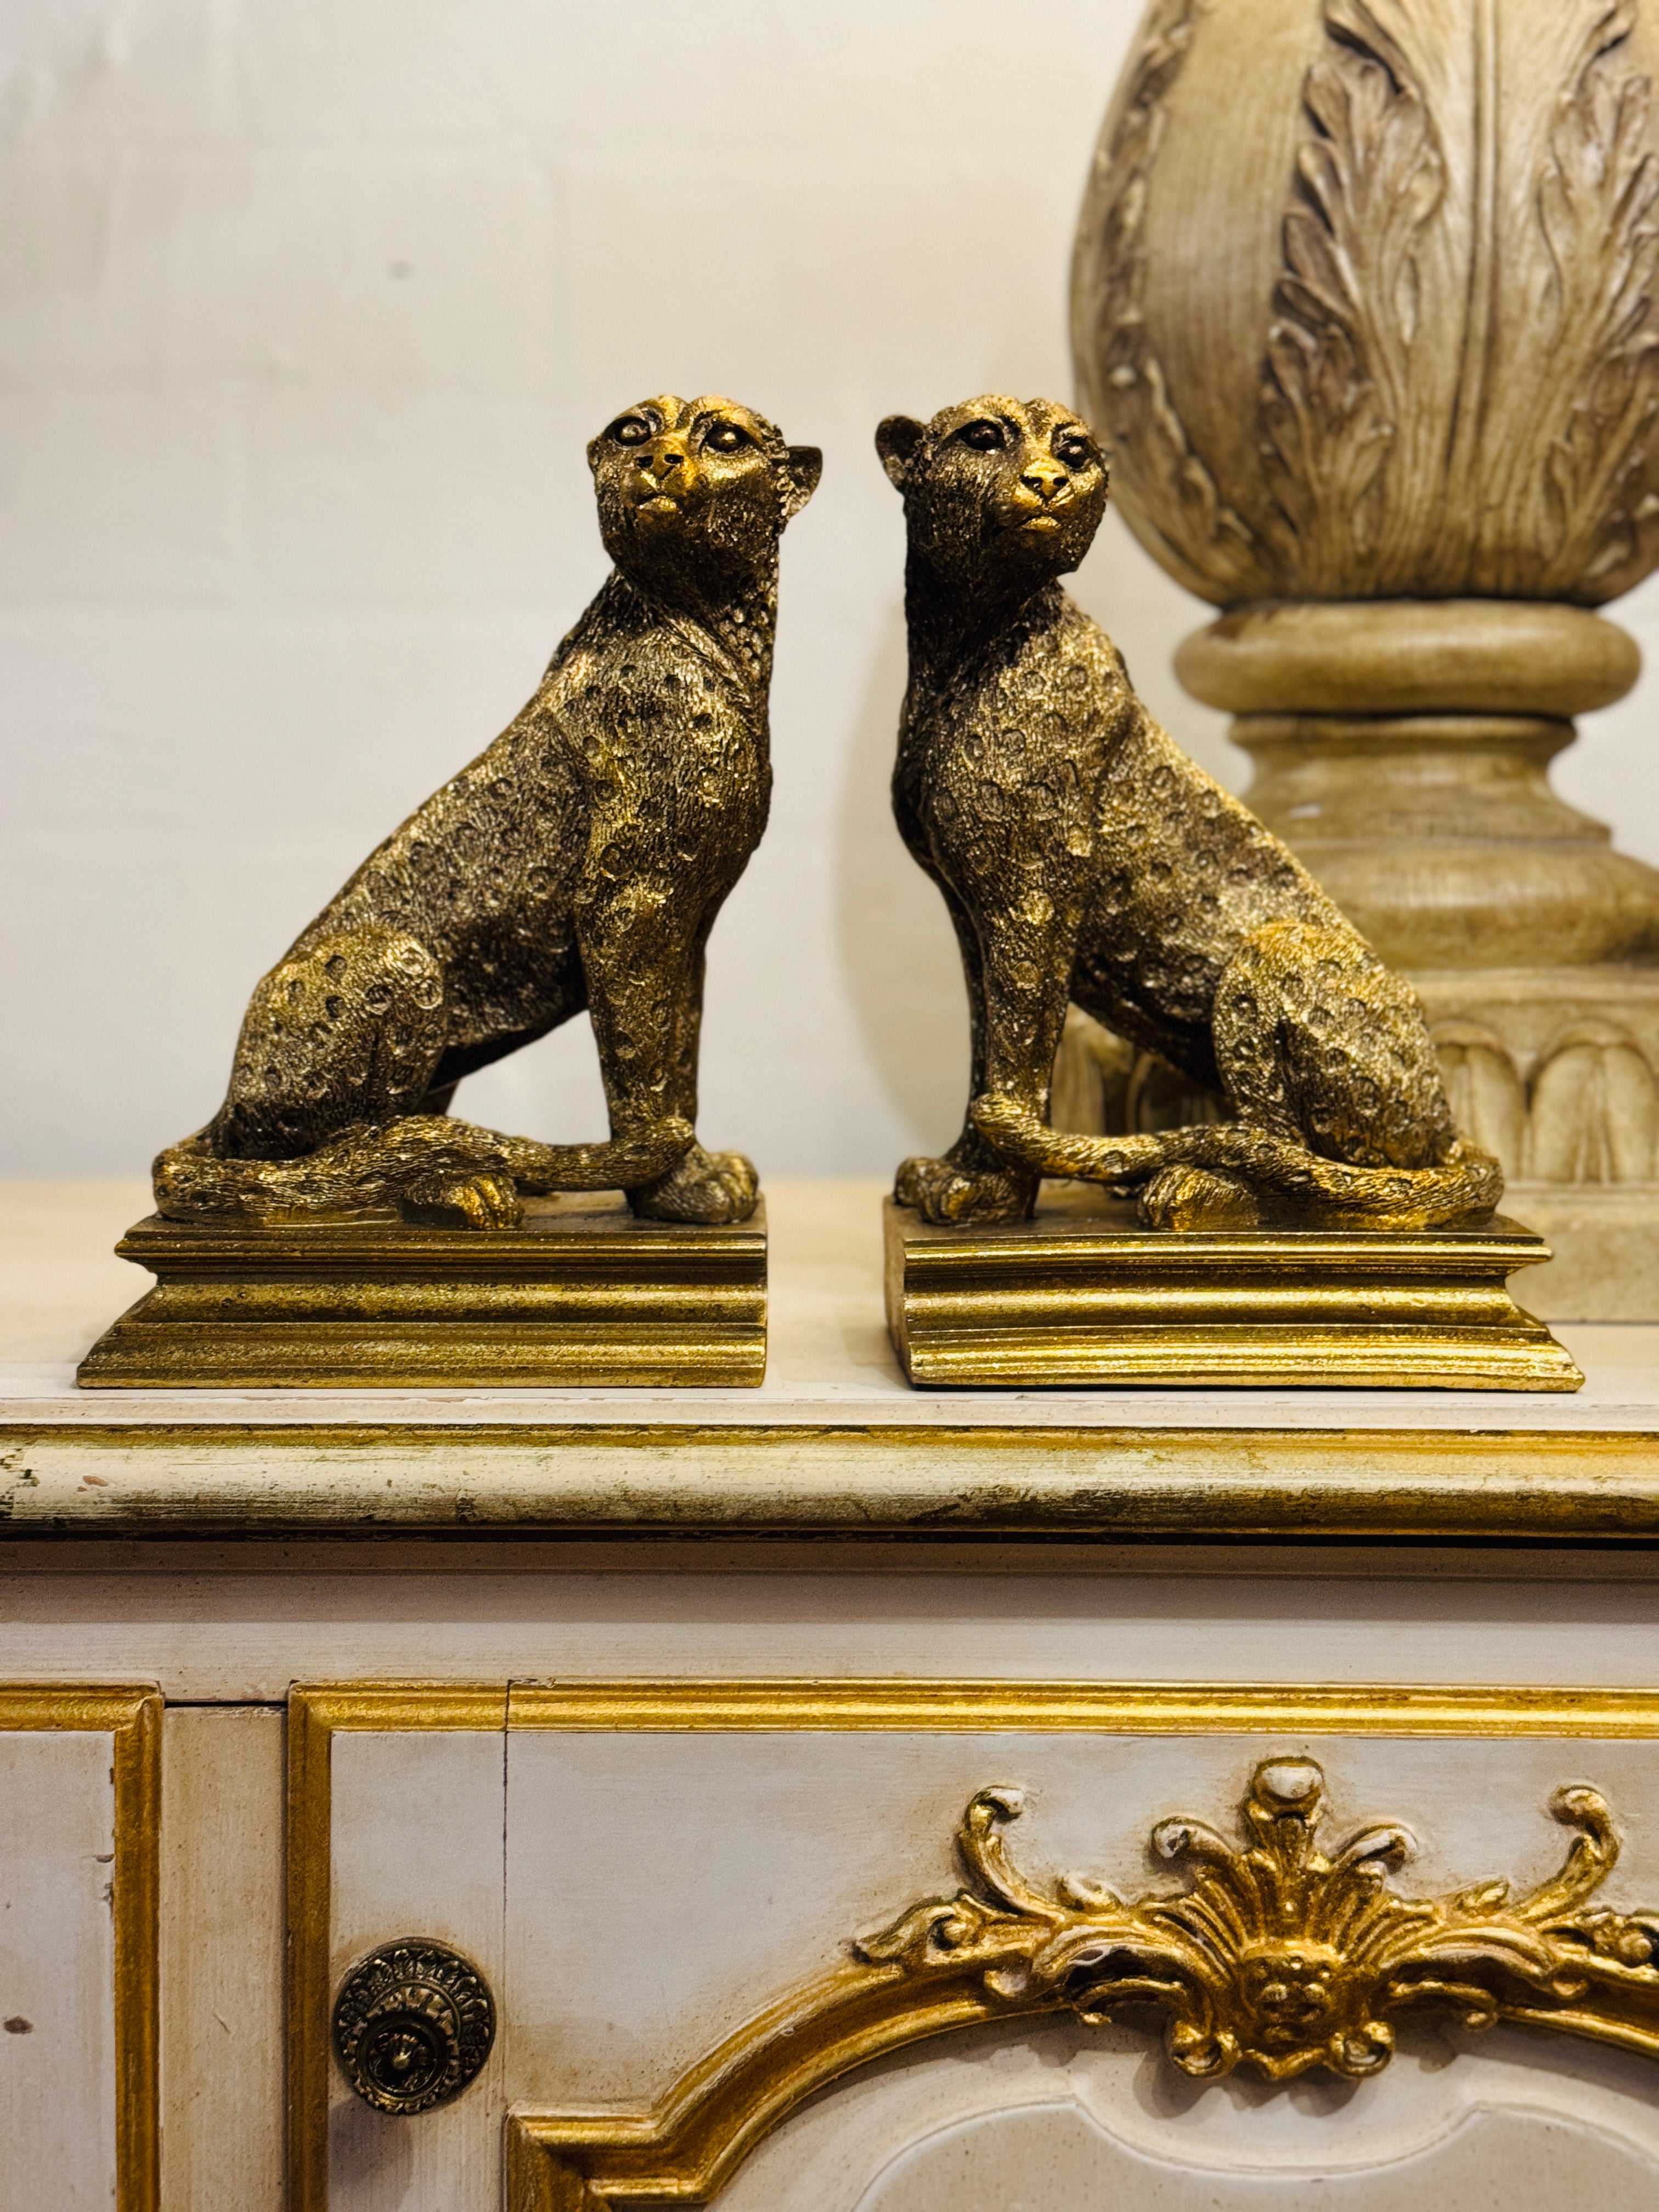 Leopard Bookends